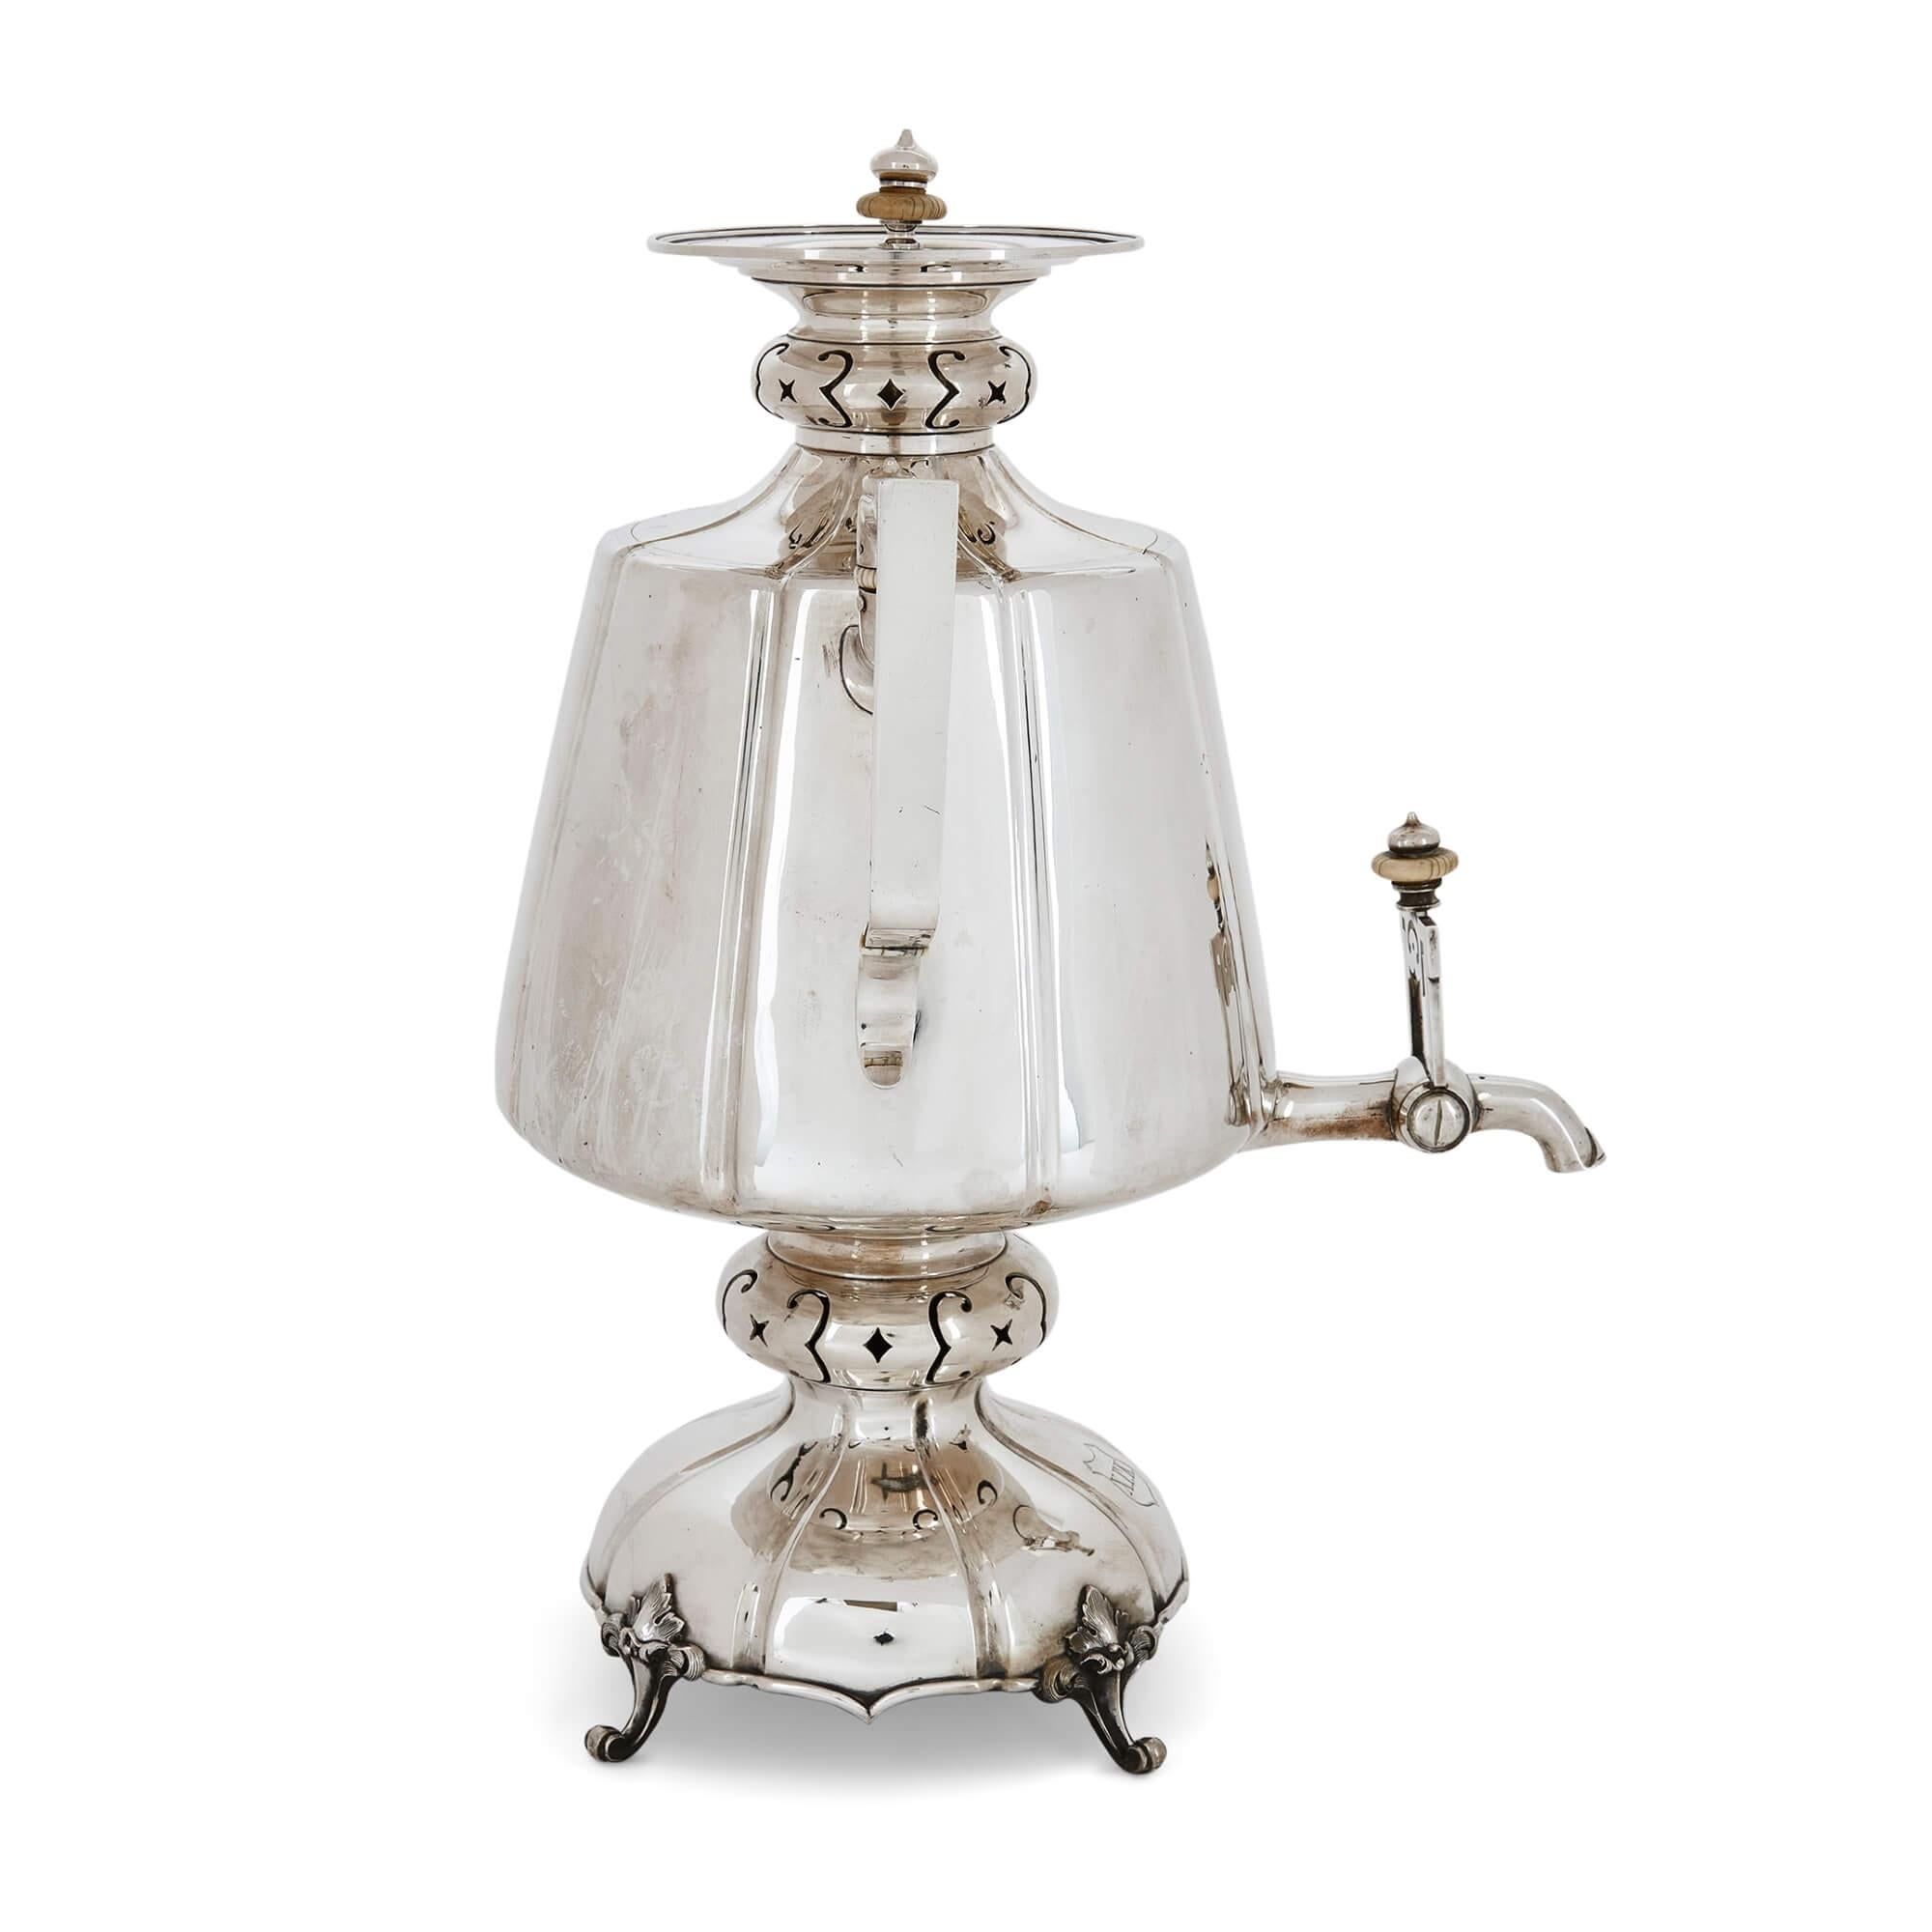 19th century Russian silver samovar 
Russian, 1875
Height 42cm, width 28cm, depth 31cm

This elegant silver samovar was crafted by Russian craftsmen in 1875. Samovars are a very important object within Russian culture making the example in Mayfair